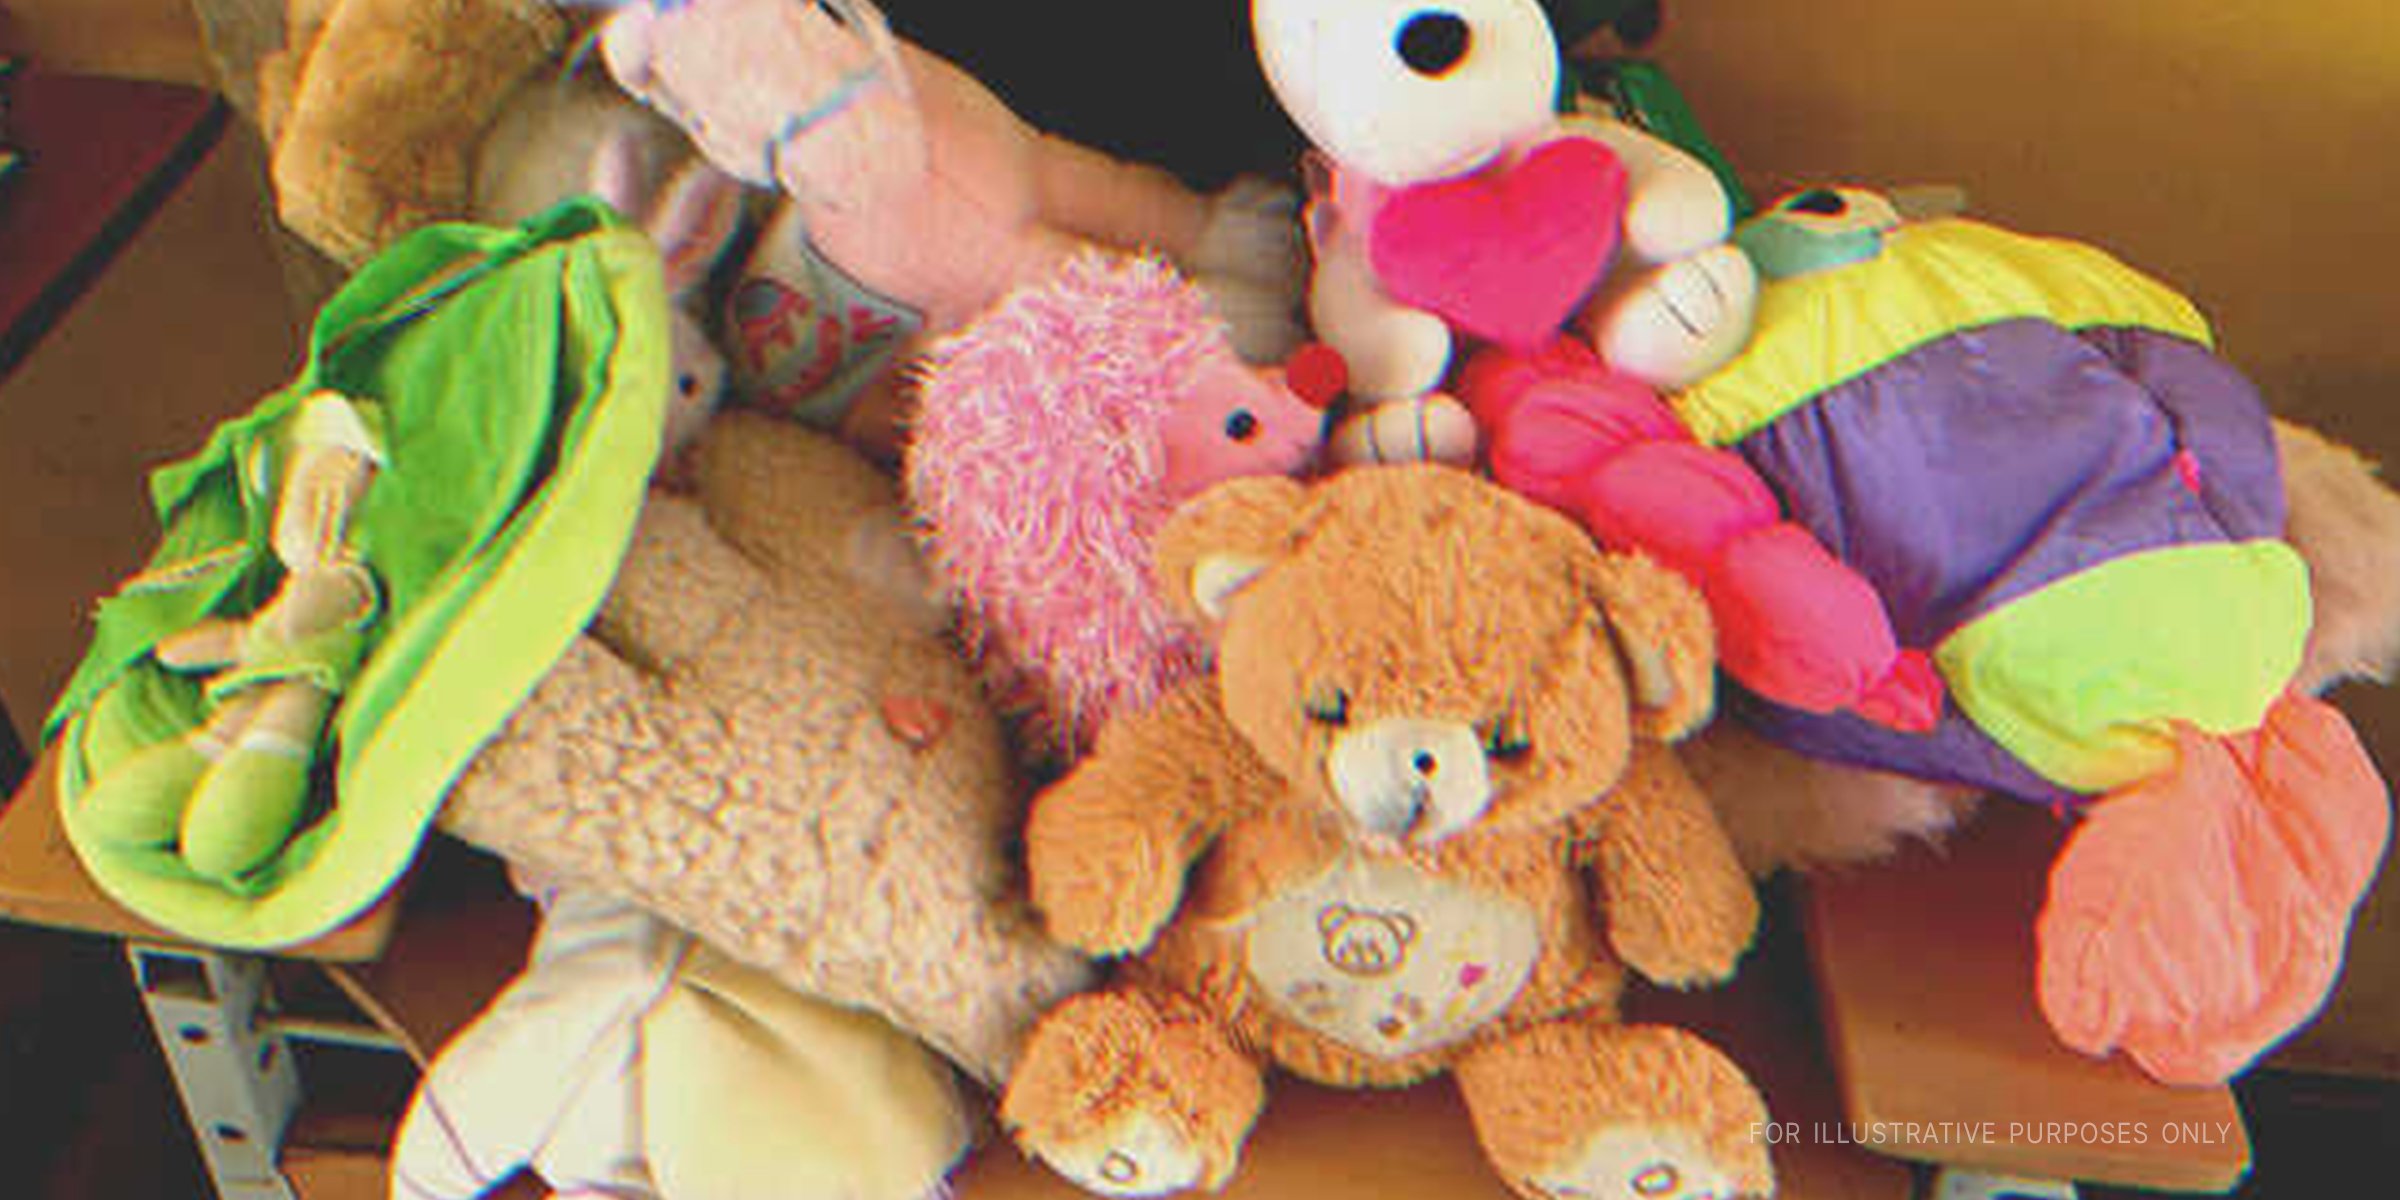 A collection of stuffed toys on a table | Source: Shutterstock